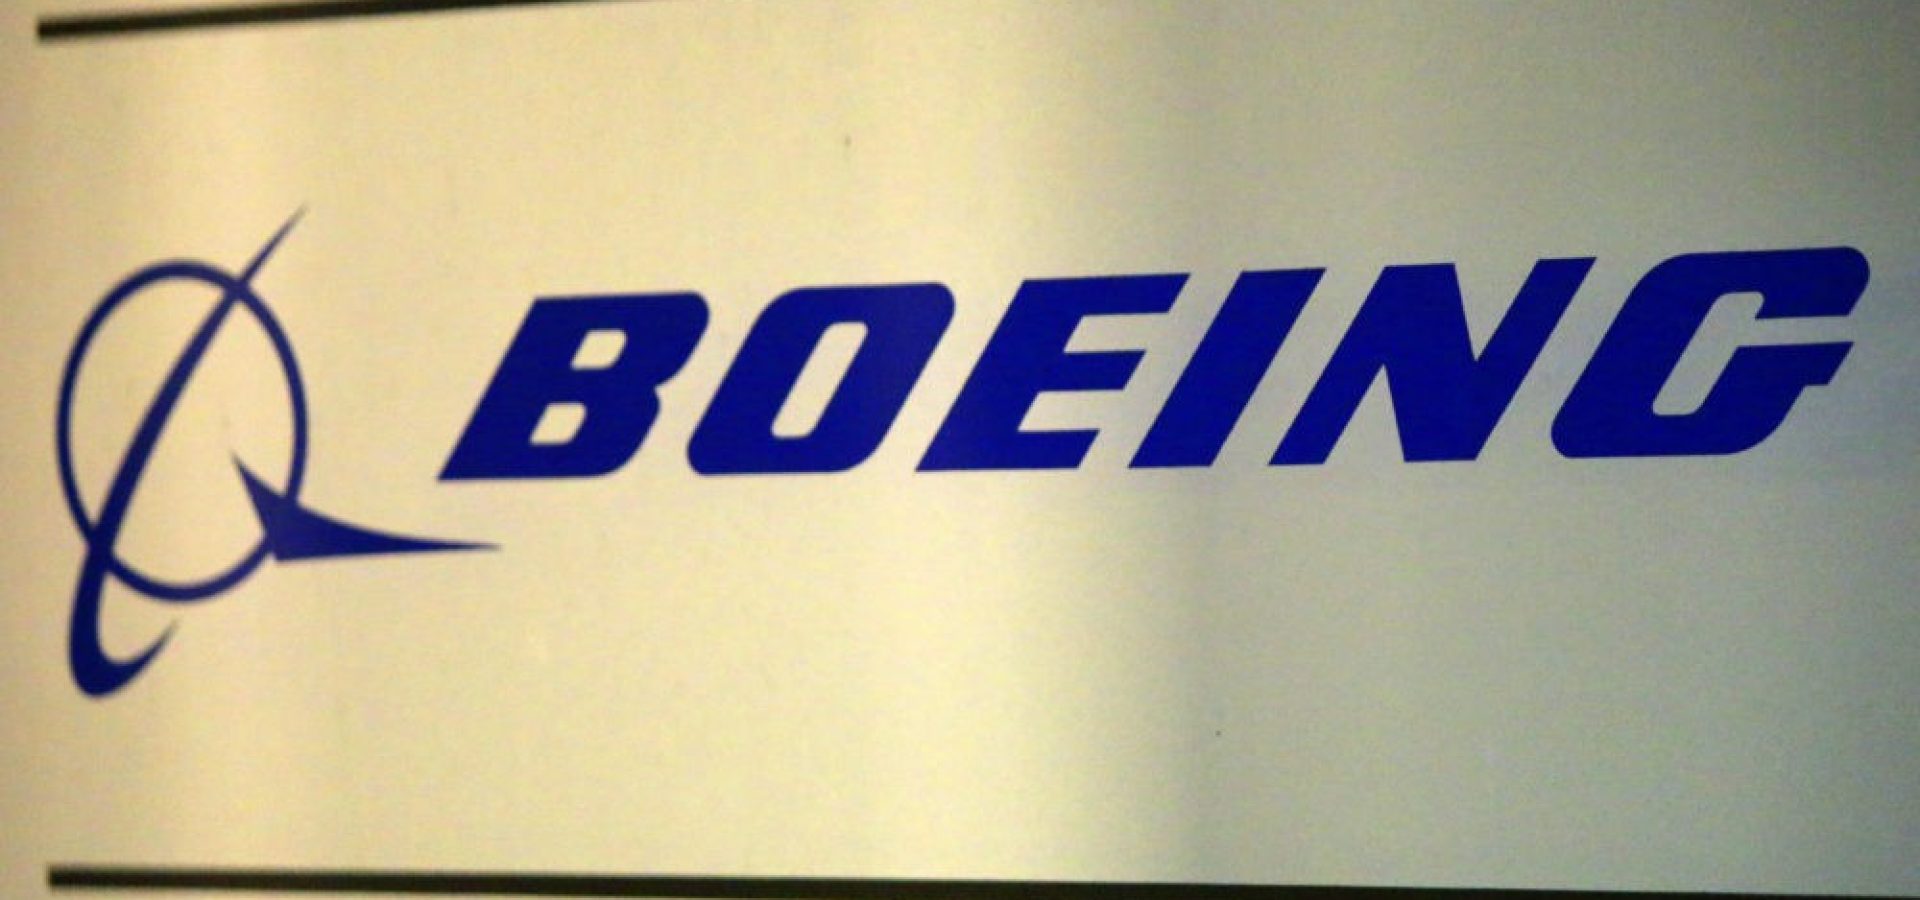 Boeing commercial airplanes face serious problems as sales are falling